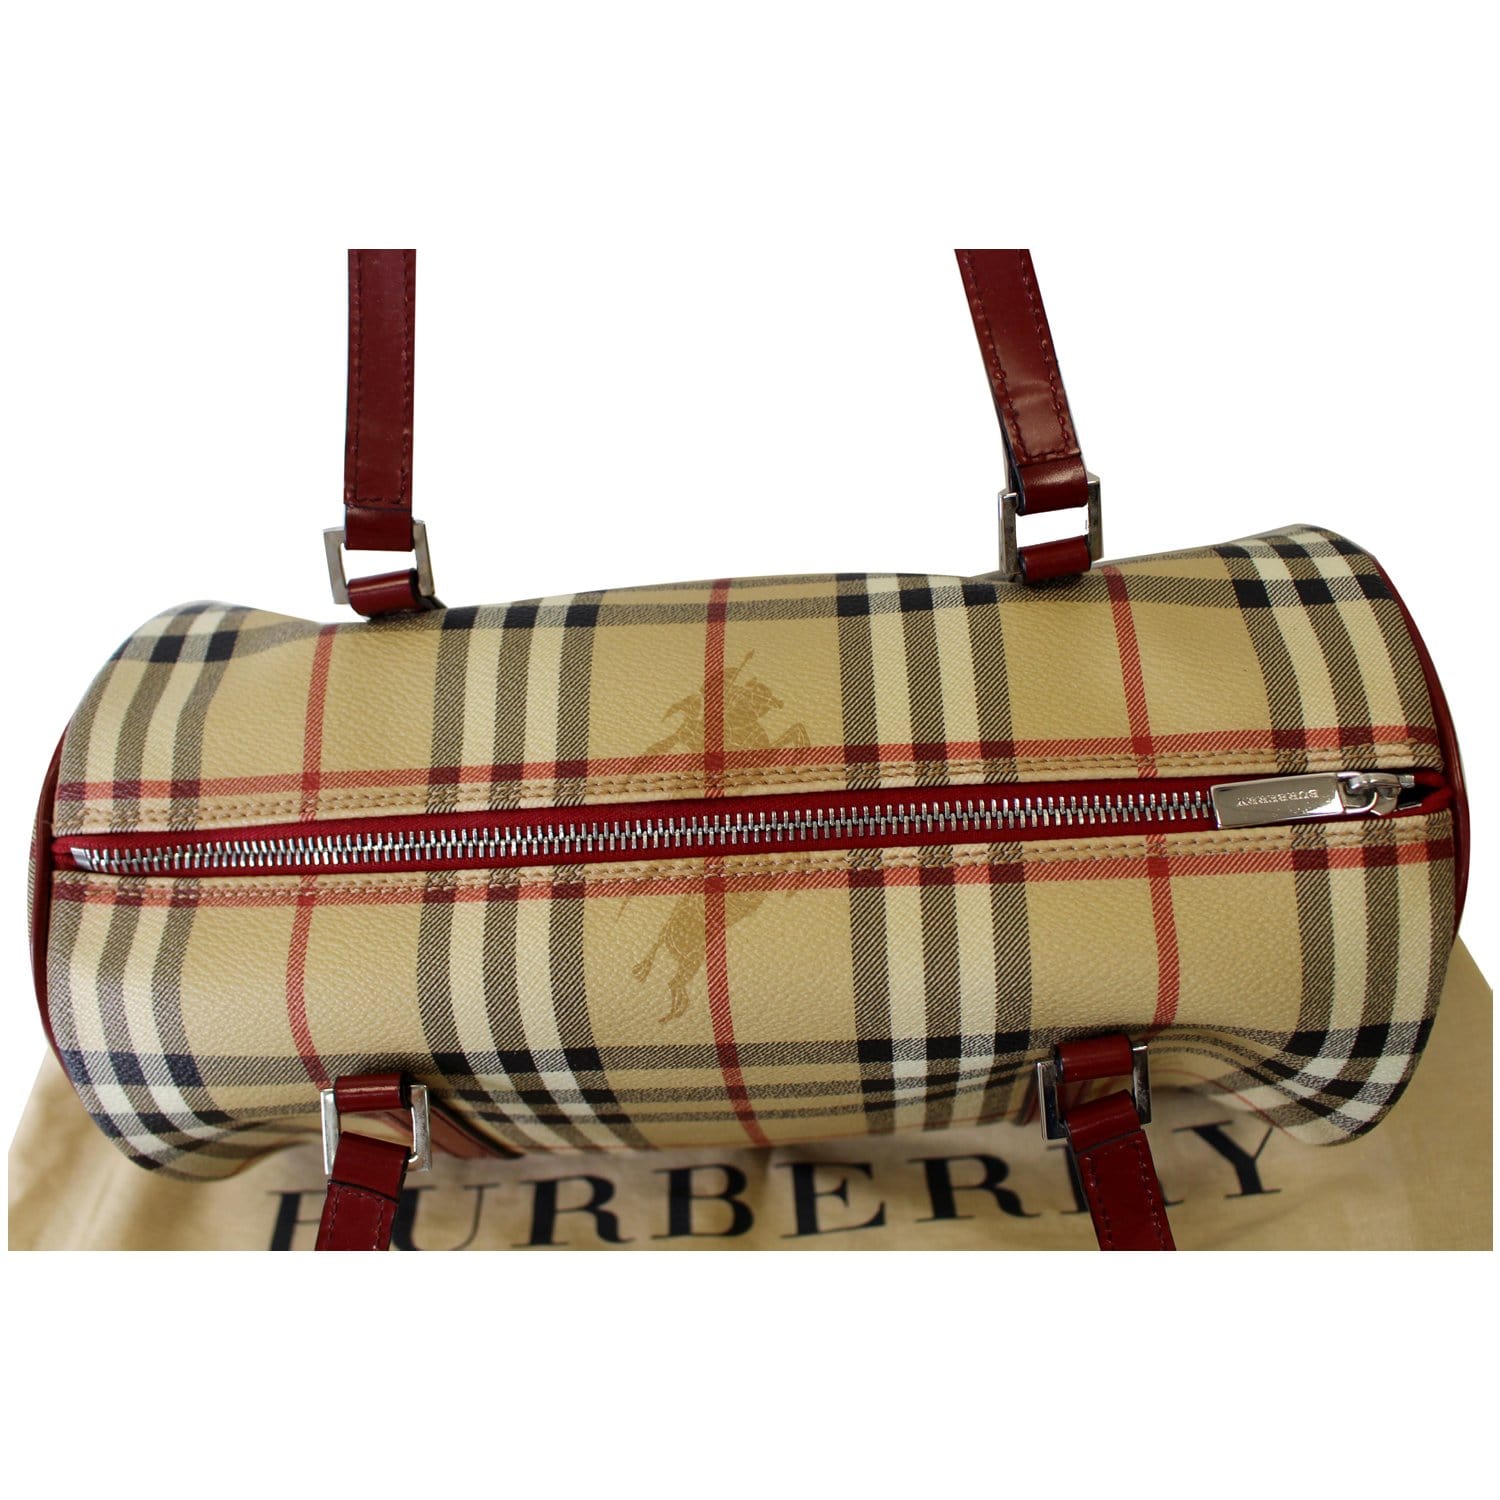 Authentic Burberry Red Leather Canvas Barrel Bag